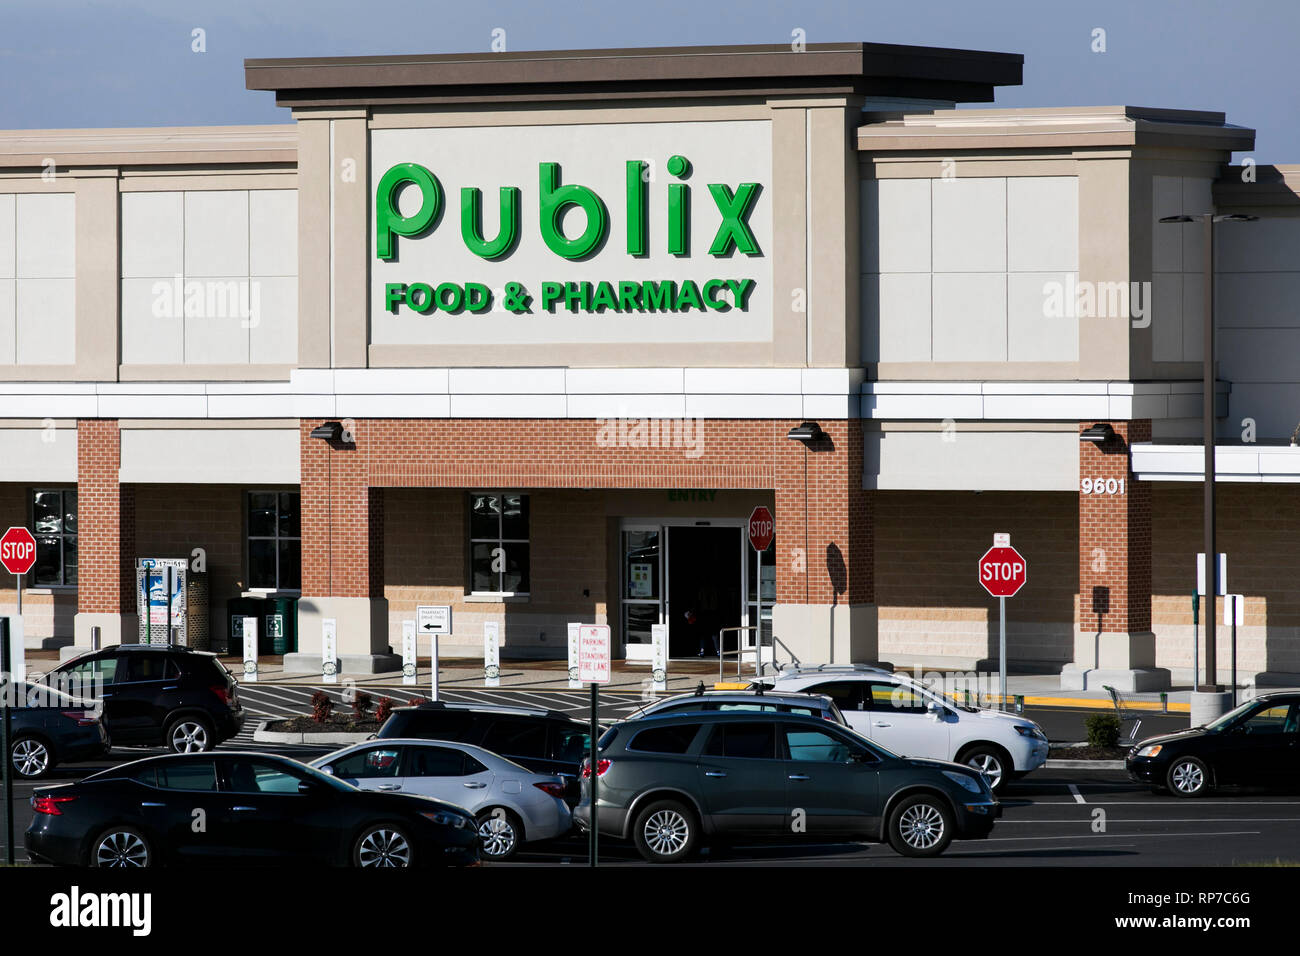 A logo sign outside of a Publix grocery store location in Fredericksburg, Virginia on February 19, 2019. Stock Photo